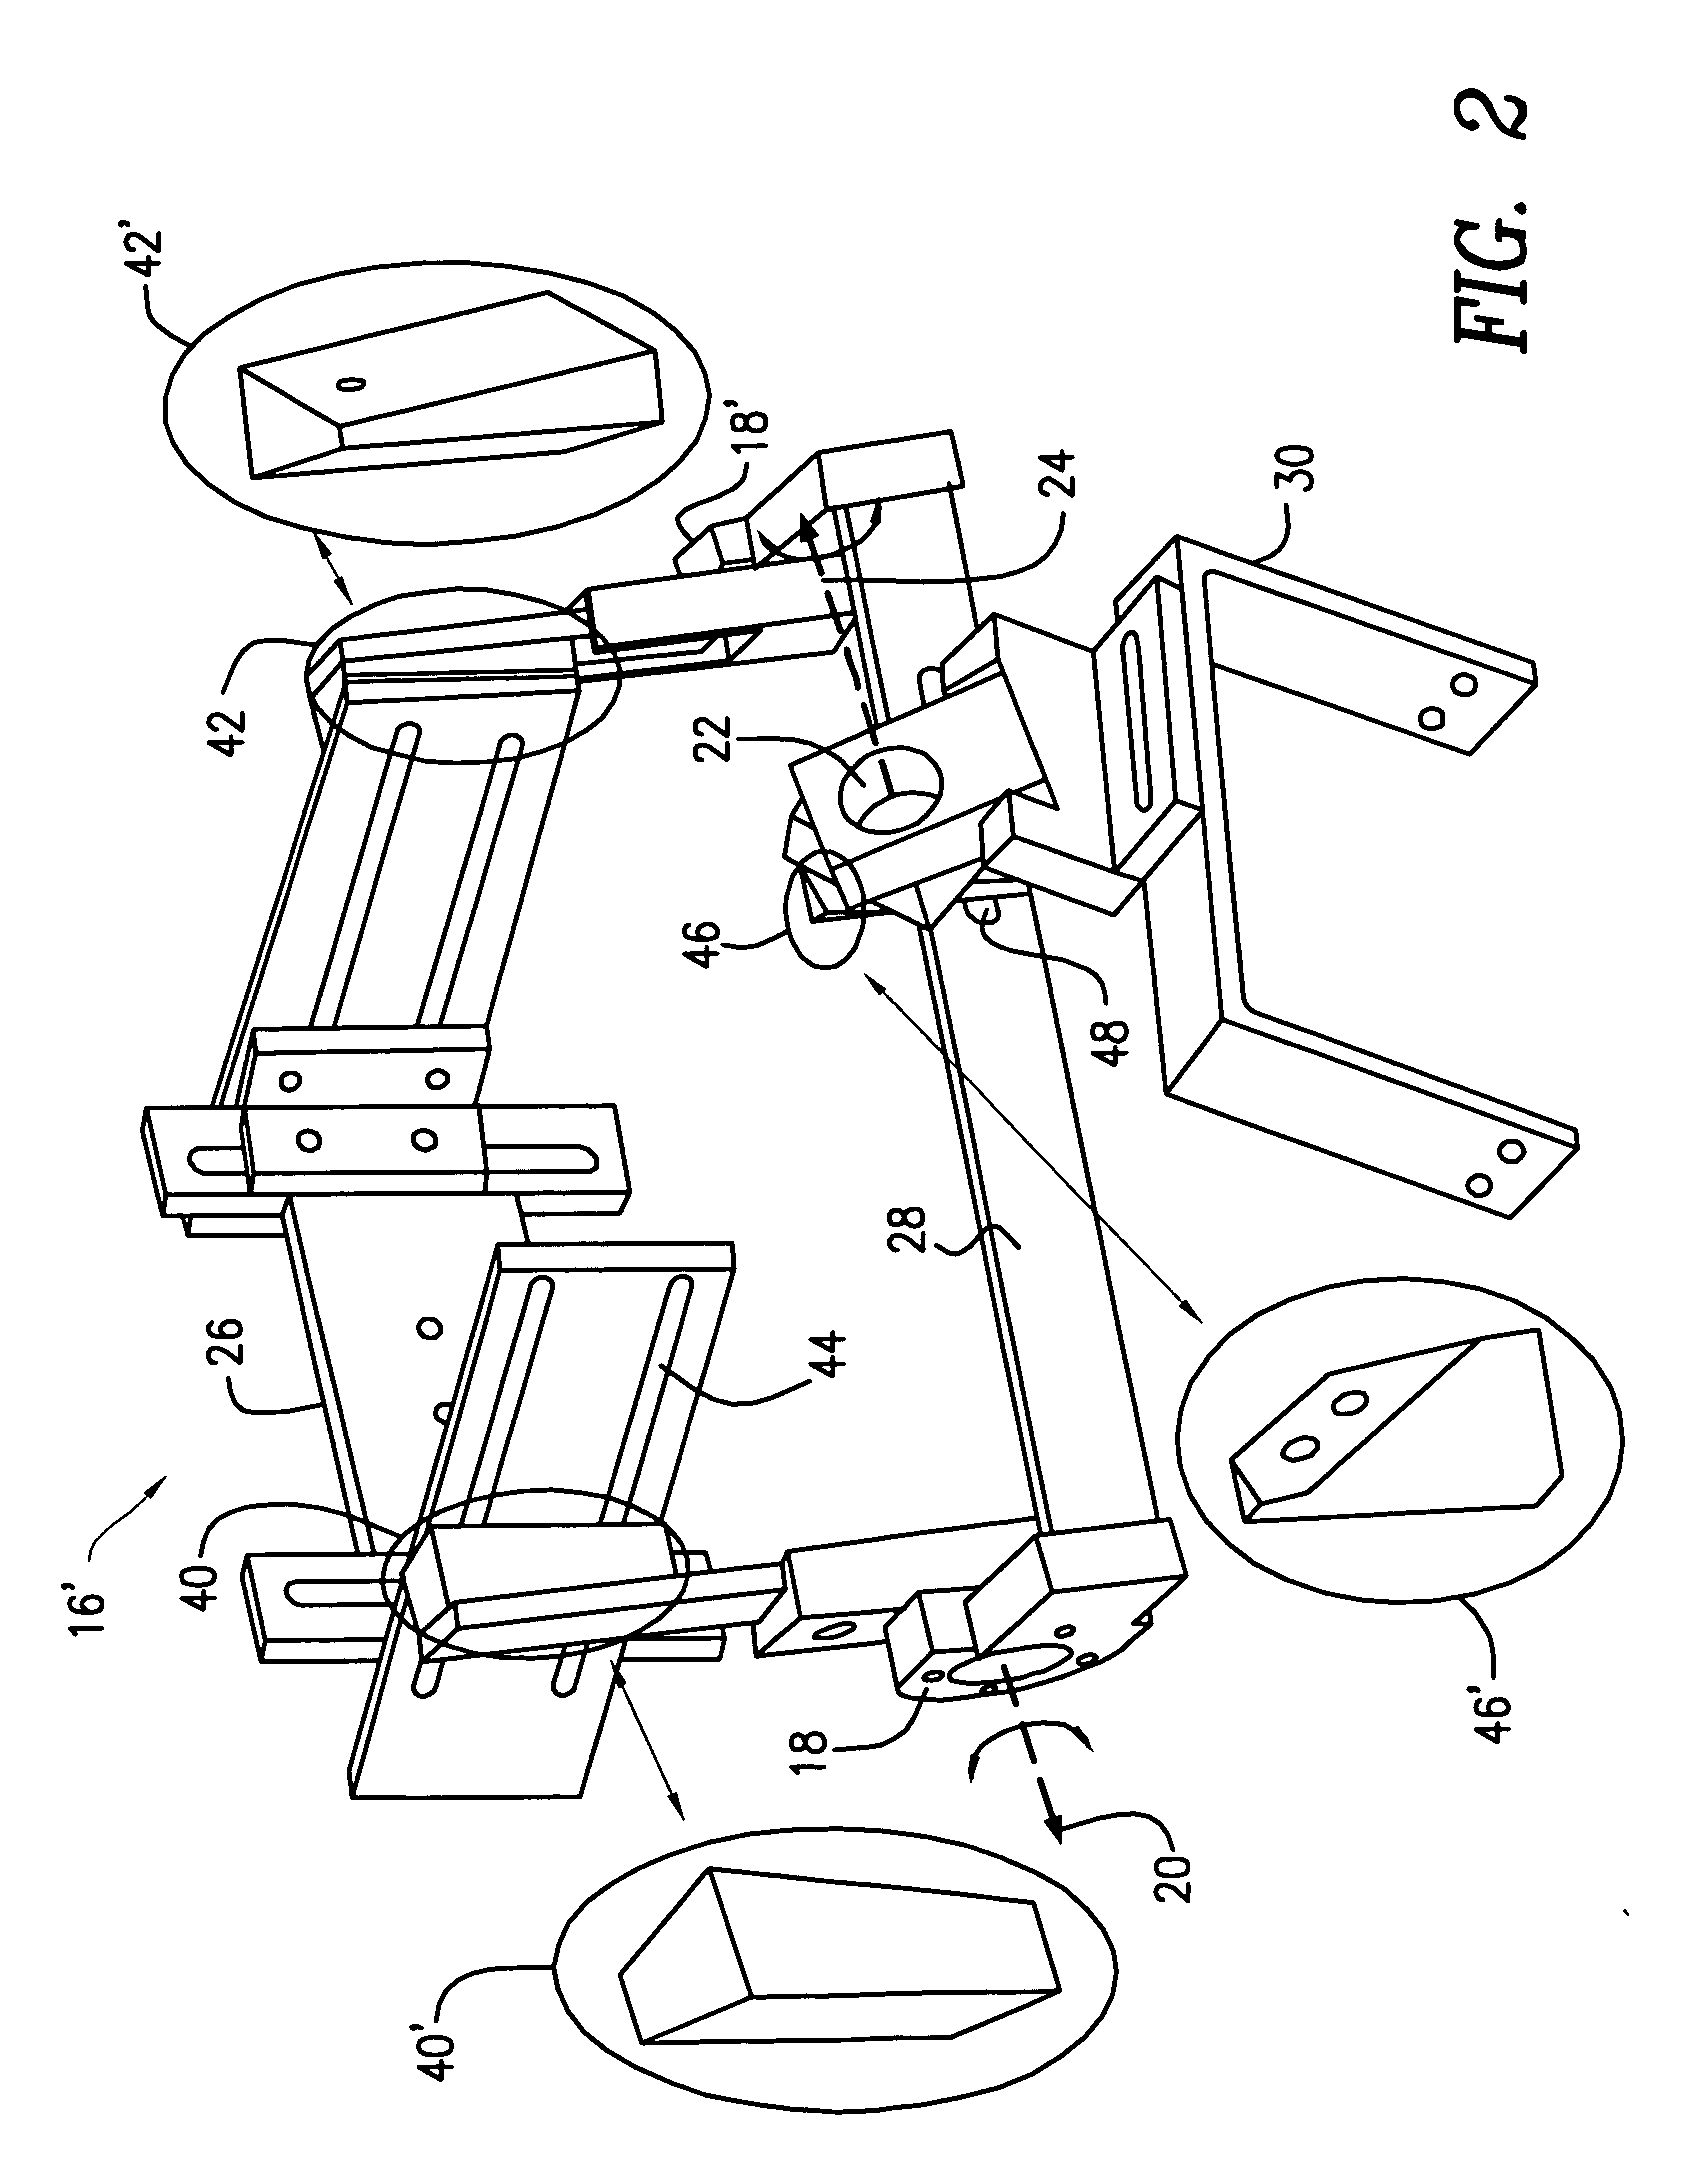 Ankle-foot orthosis device